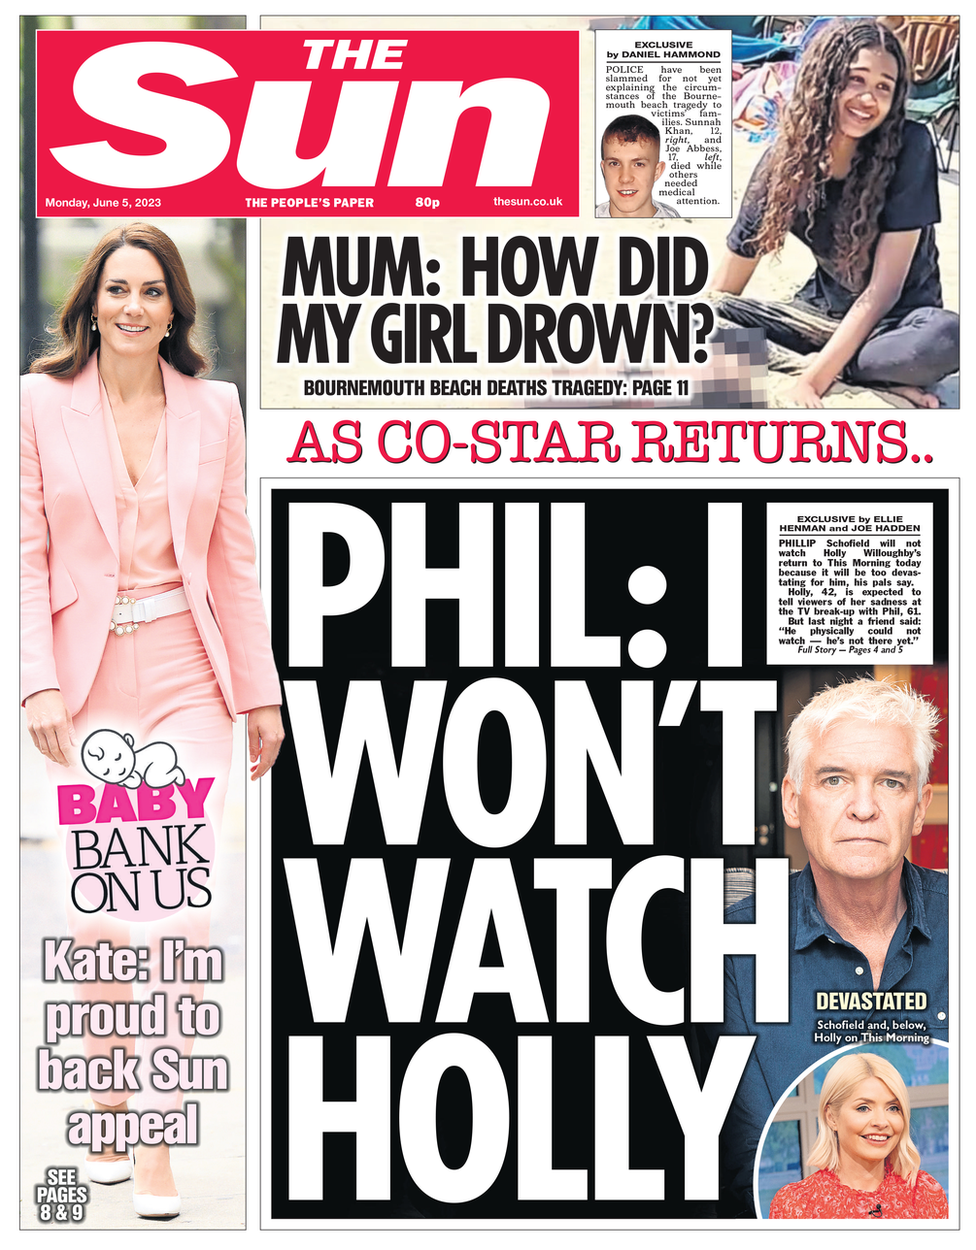 The front page of the The Sun